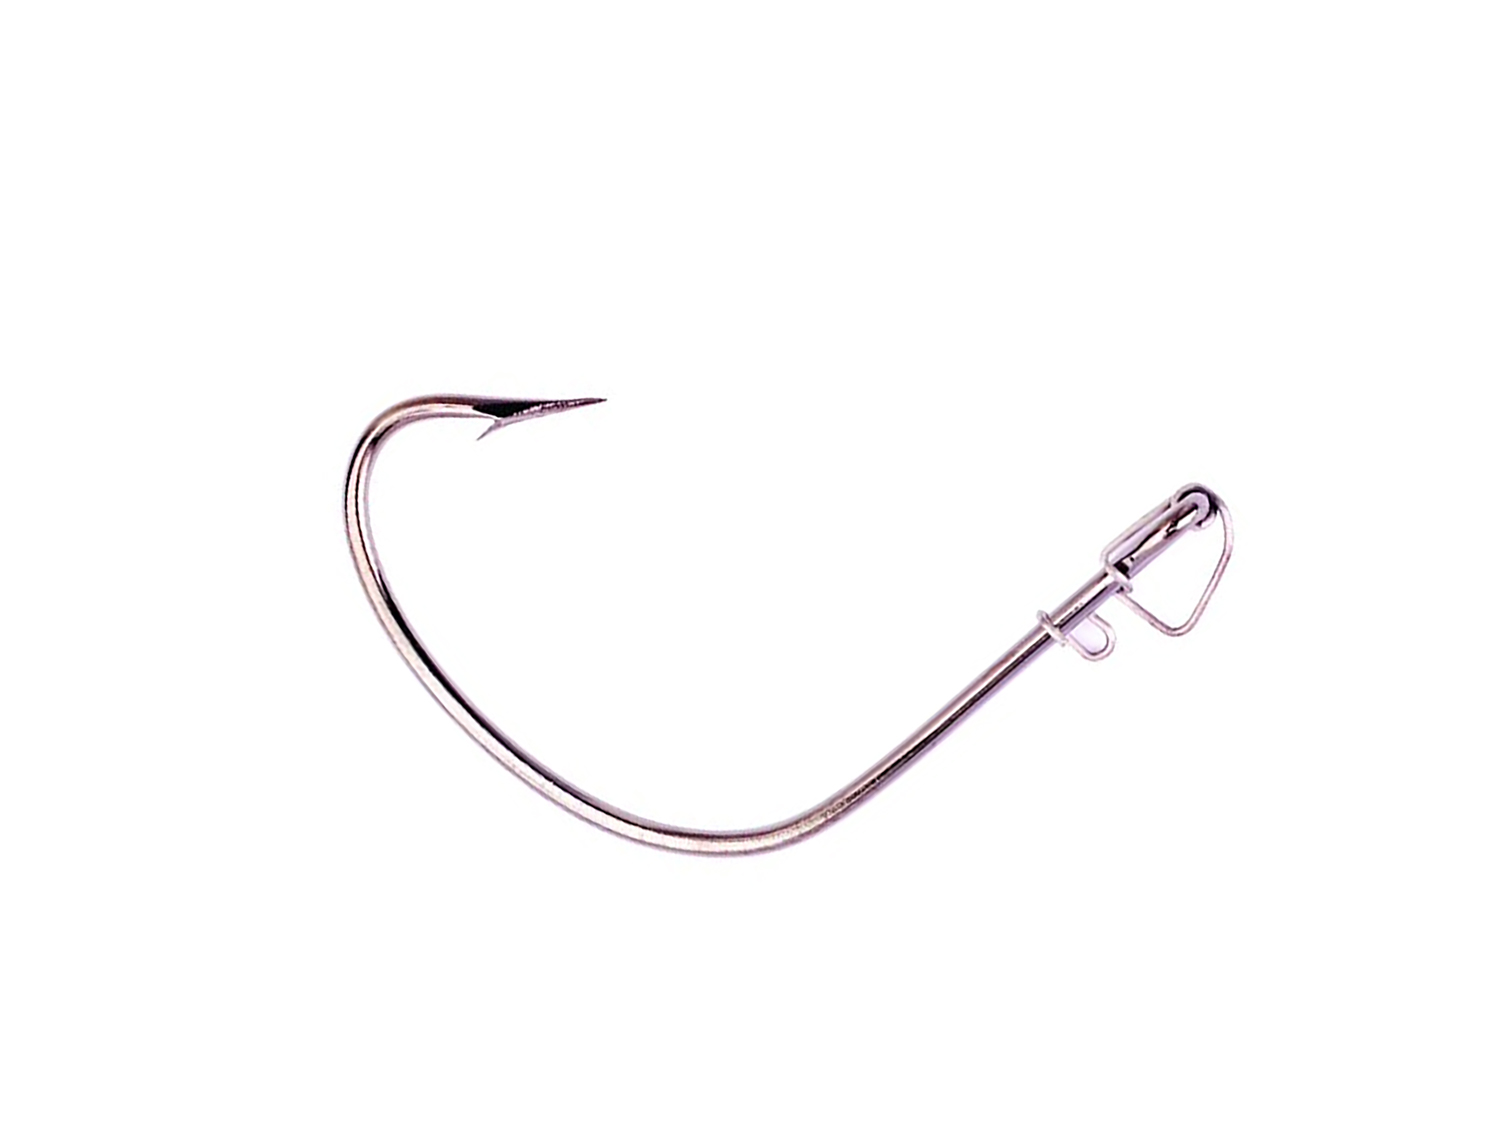 Eagle Claw Lazer Sharp L150G Shaw Grigsby HP Tournament Hooks